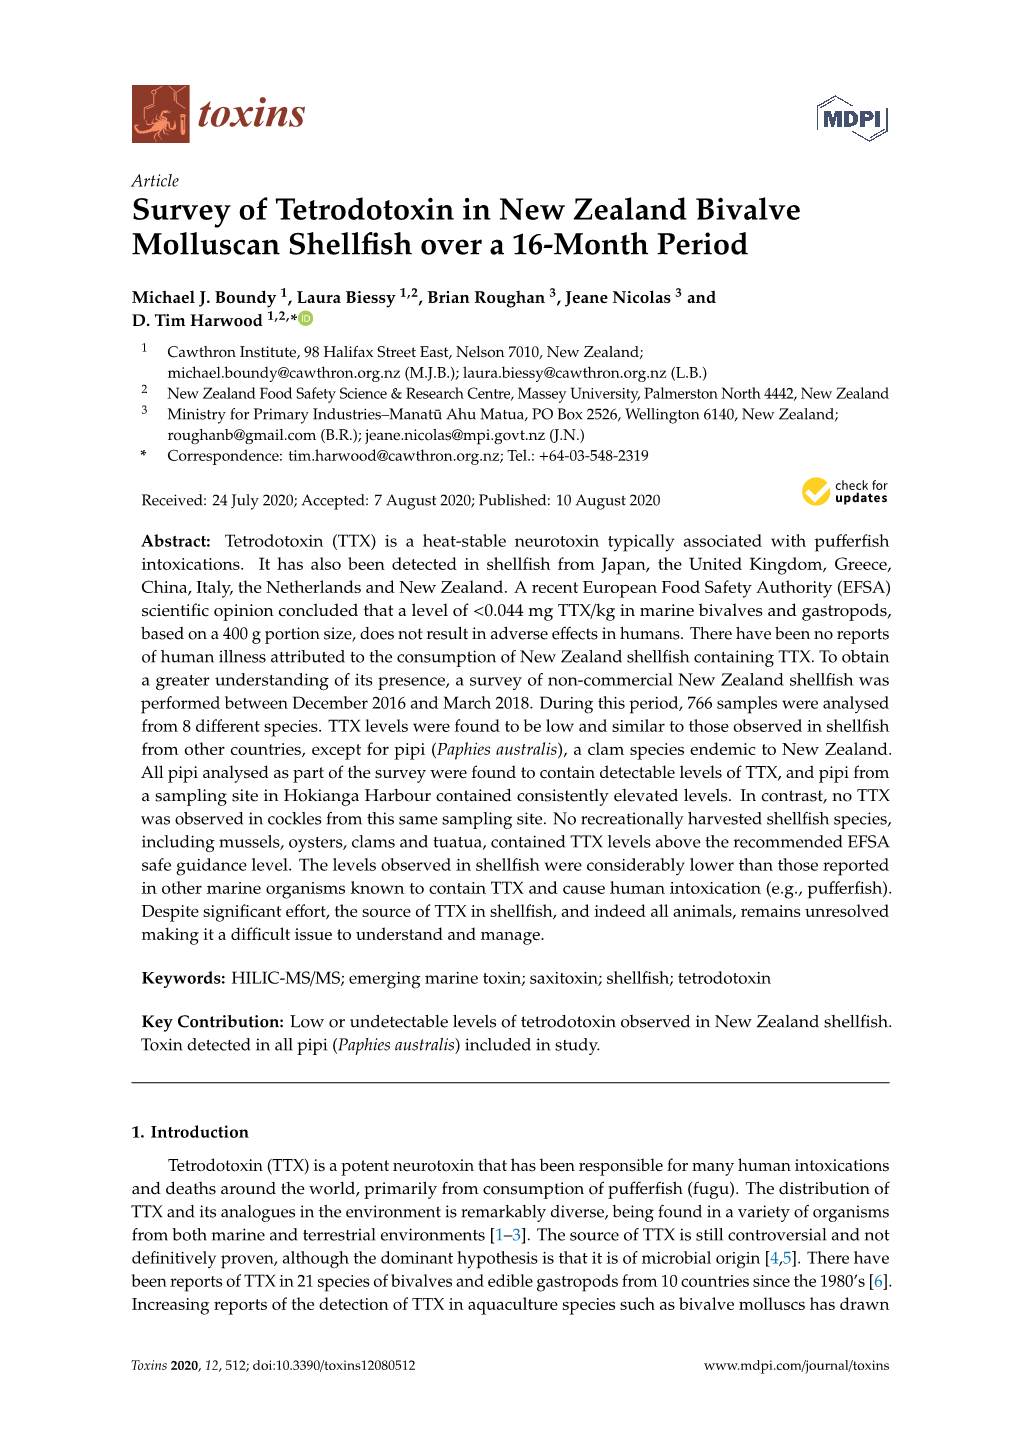 Survey of Tetrodotoxin in New Zealand Bivalve Molluscan Shellﬁsh Over a 16-Month Period